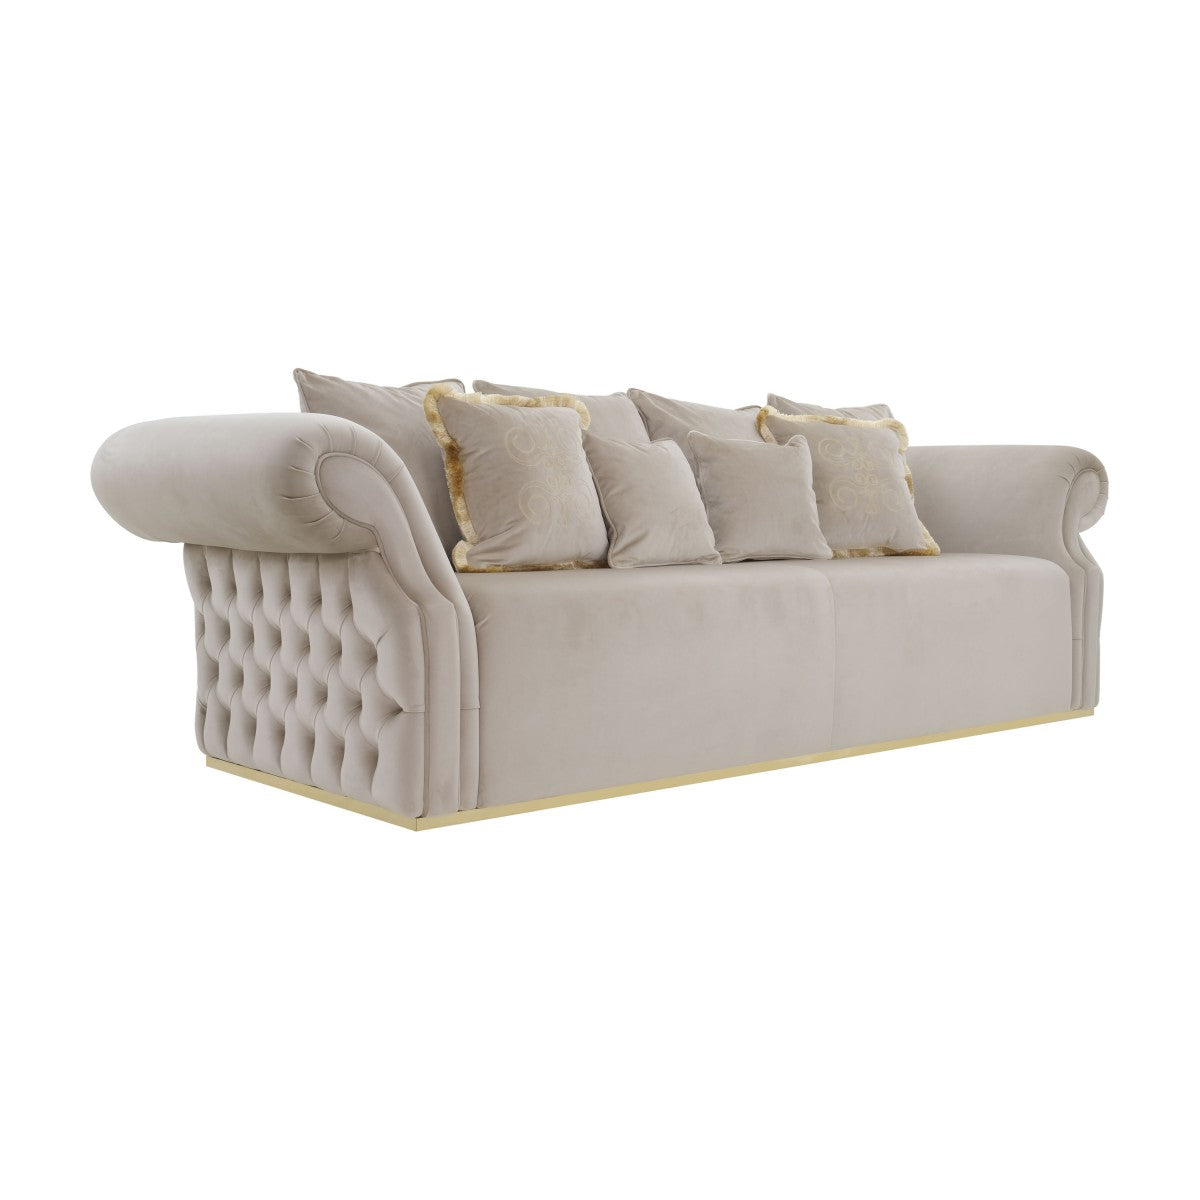 Viola Bespoke Upholstered Buttoned Luxury Three Seater Sofa MS555E Custom Made To Order